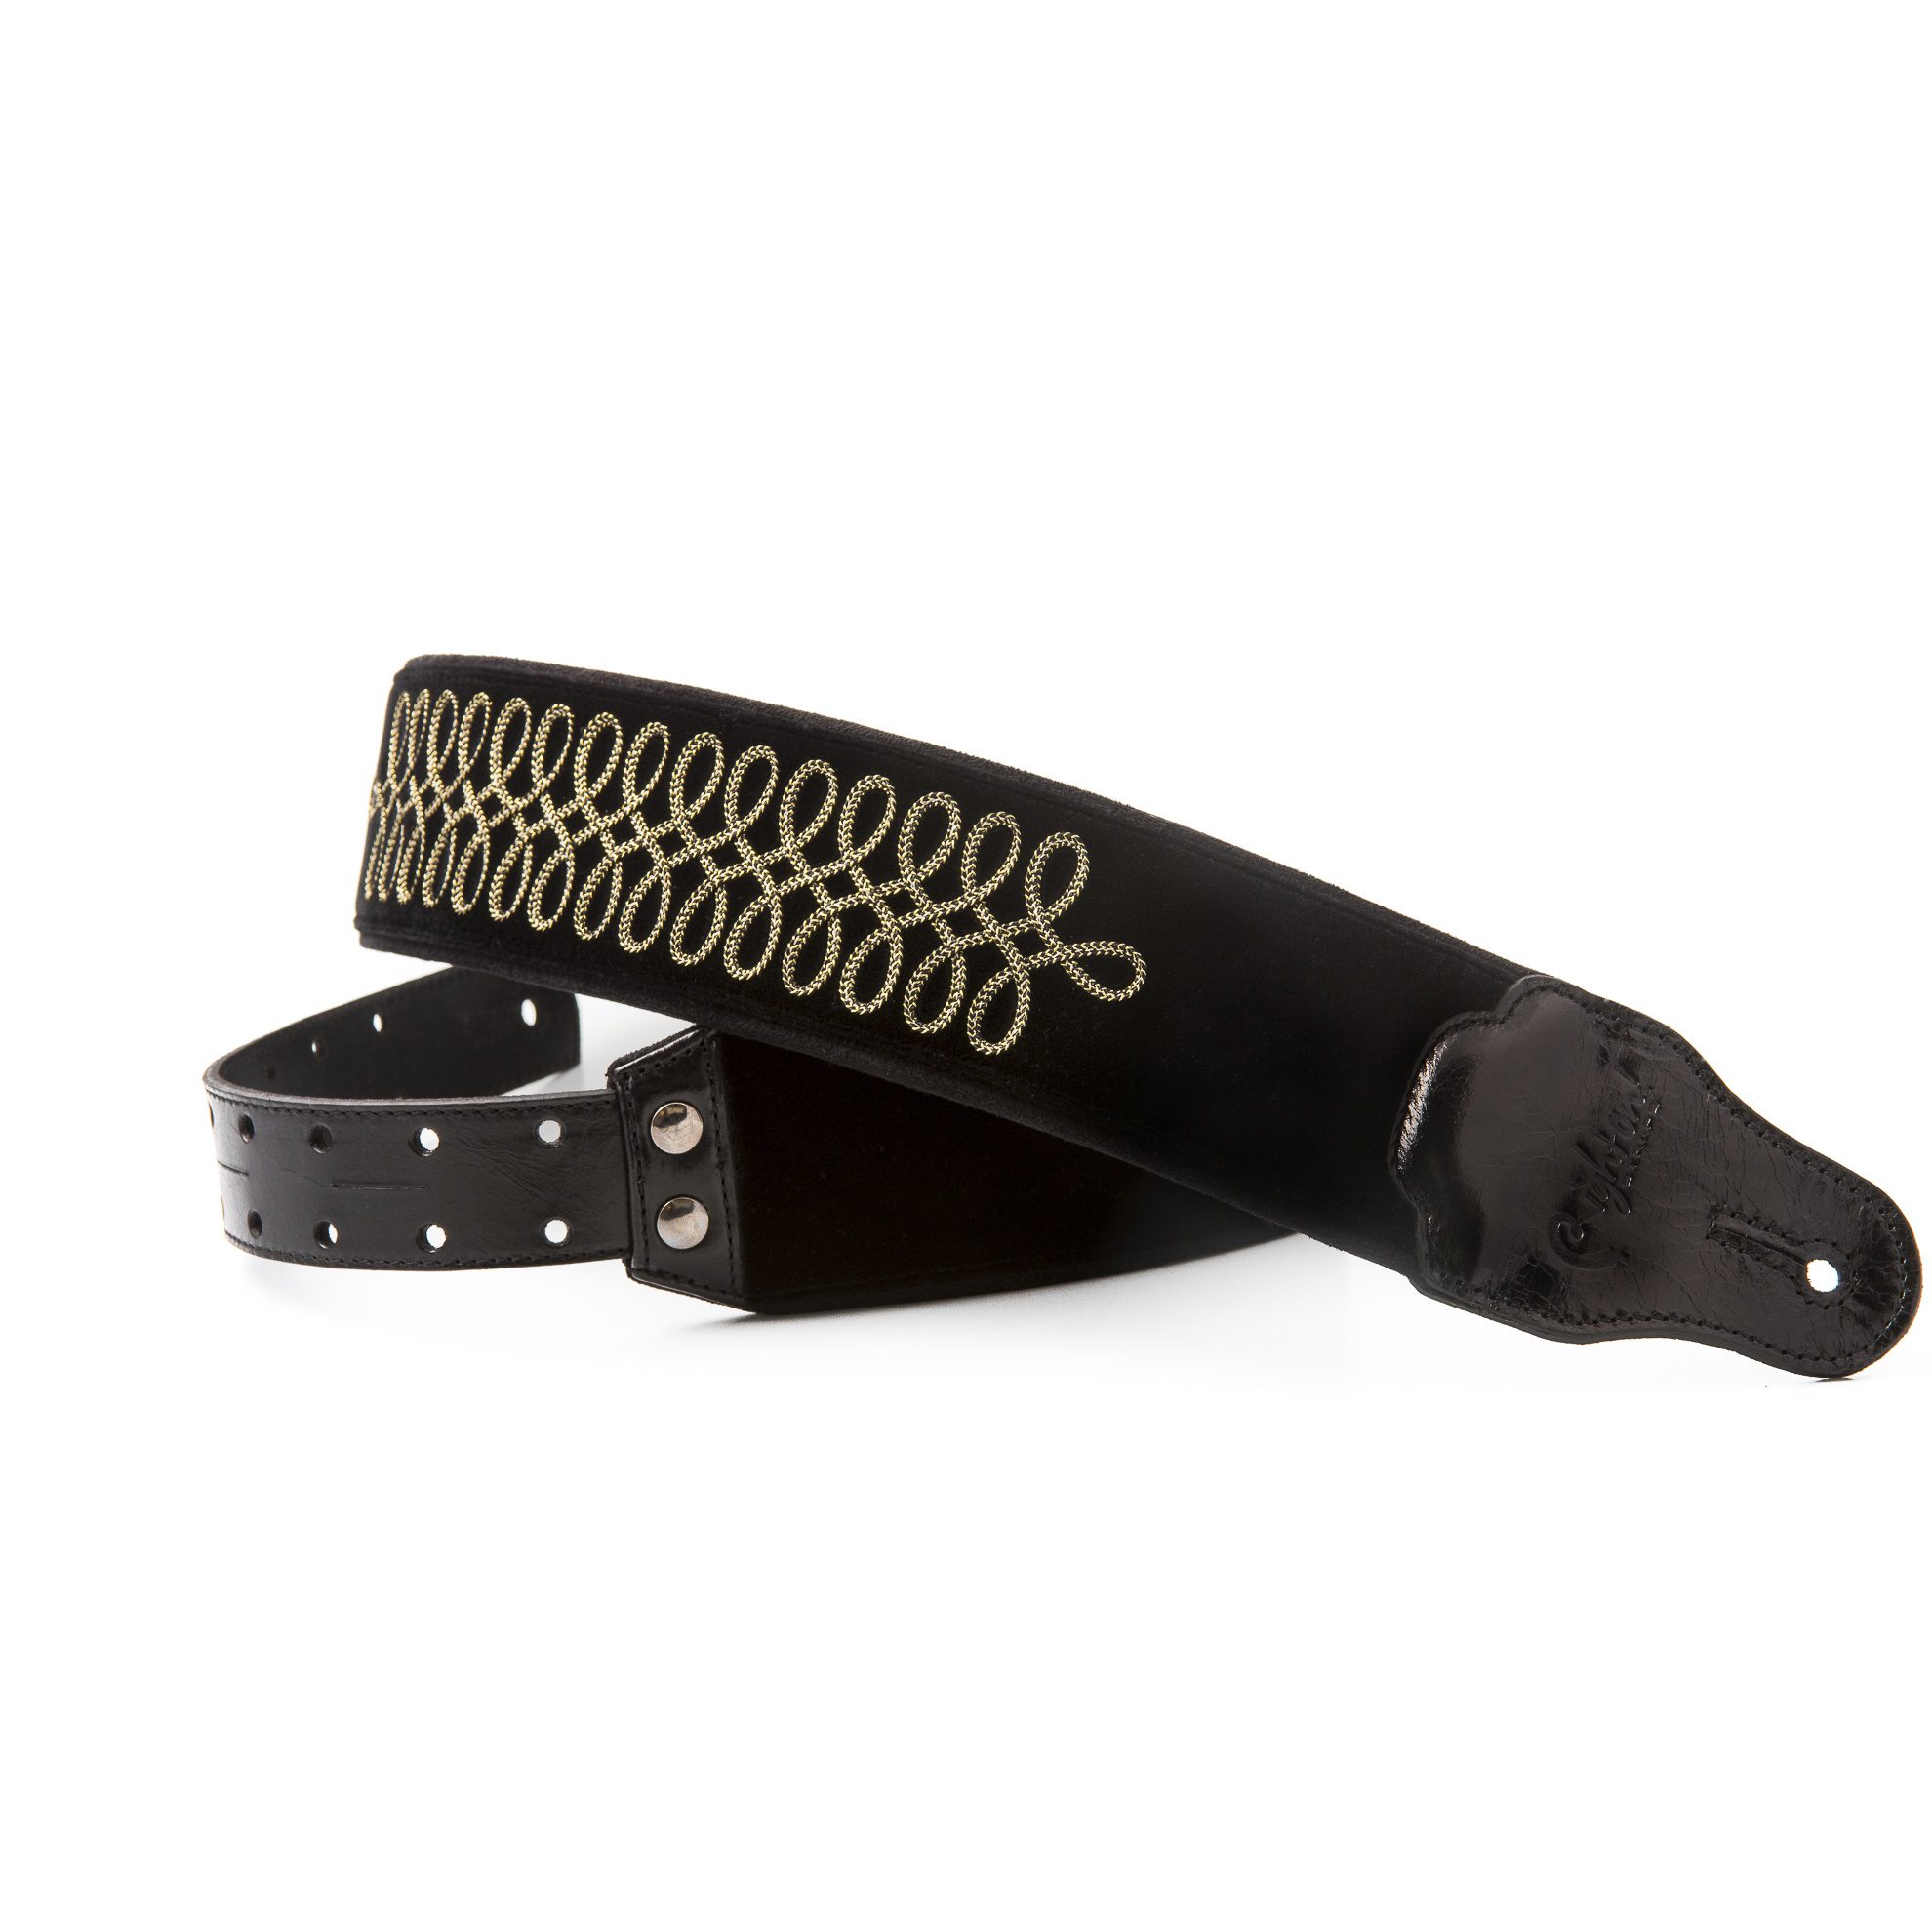 JAZZL-SGT-PEPPERS-BLACK-RIGHTONSTRAPS (6)